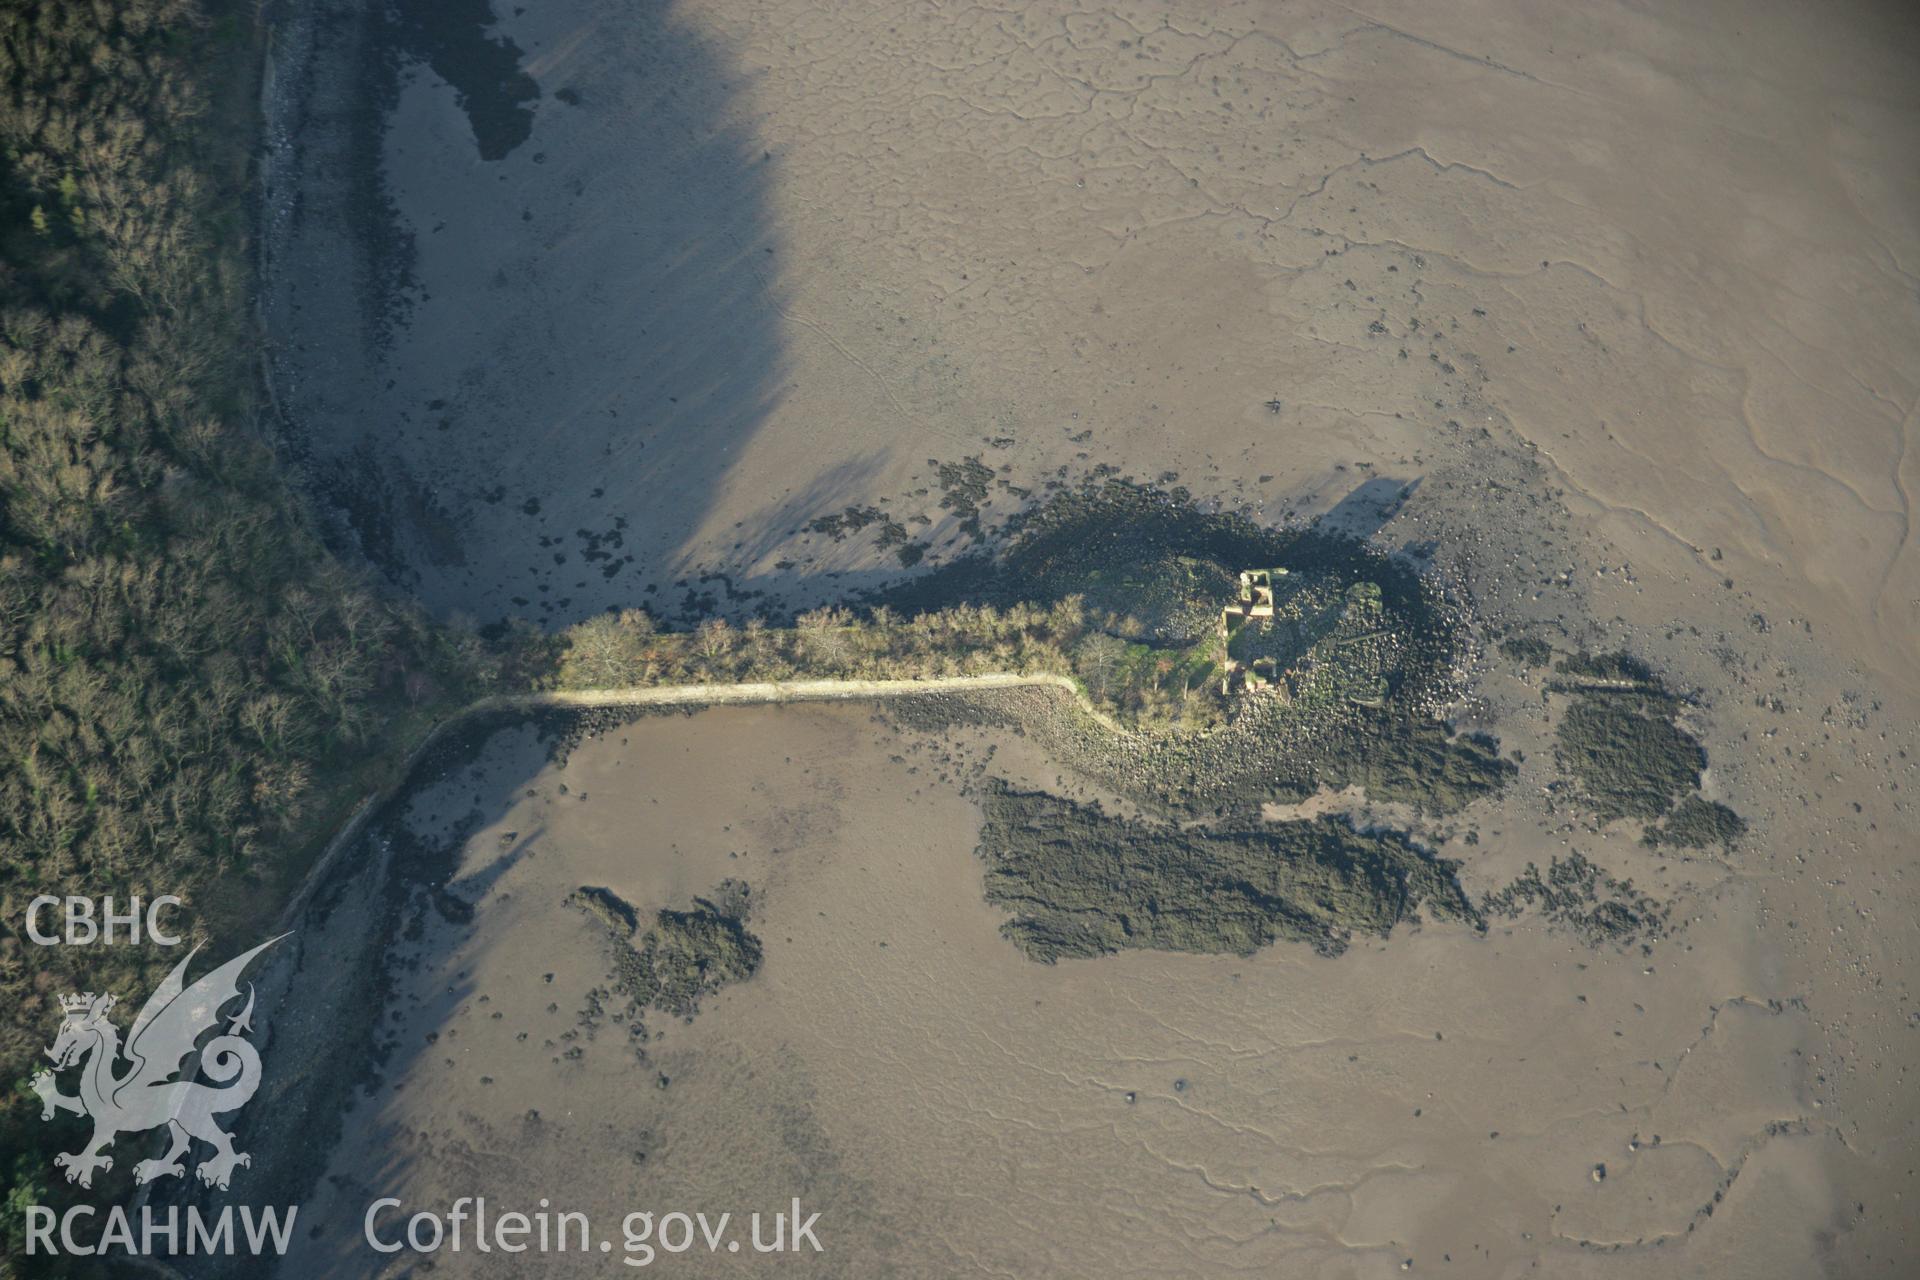 RCAHMW colour oblique aerial photograph of the Bath House and Jetty, Penrhyn Estate. Taken on 25 January 2007 by Toby Driver